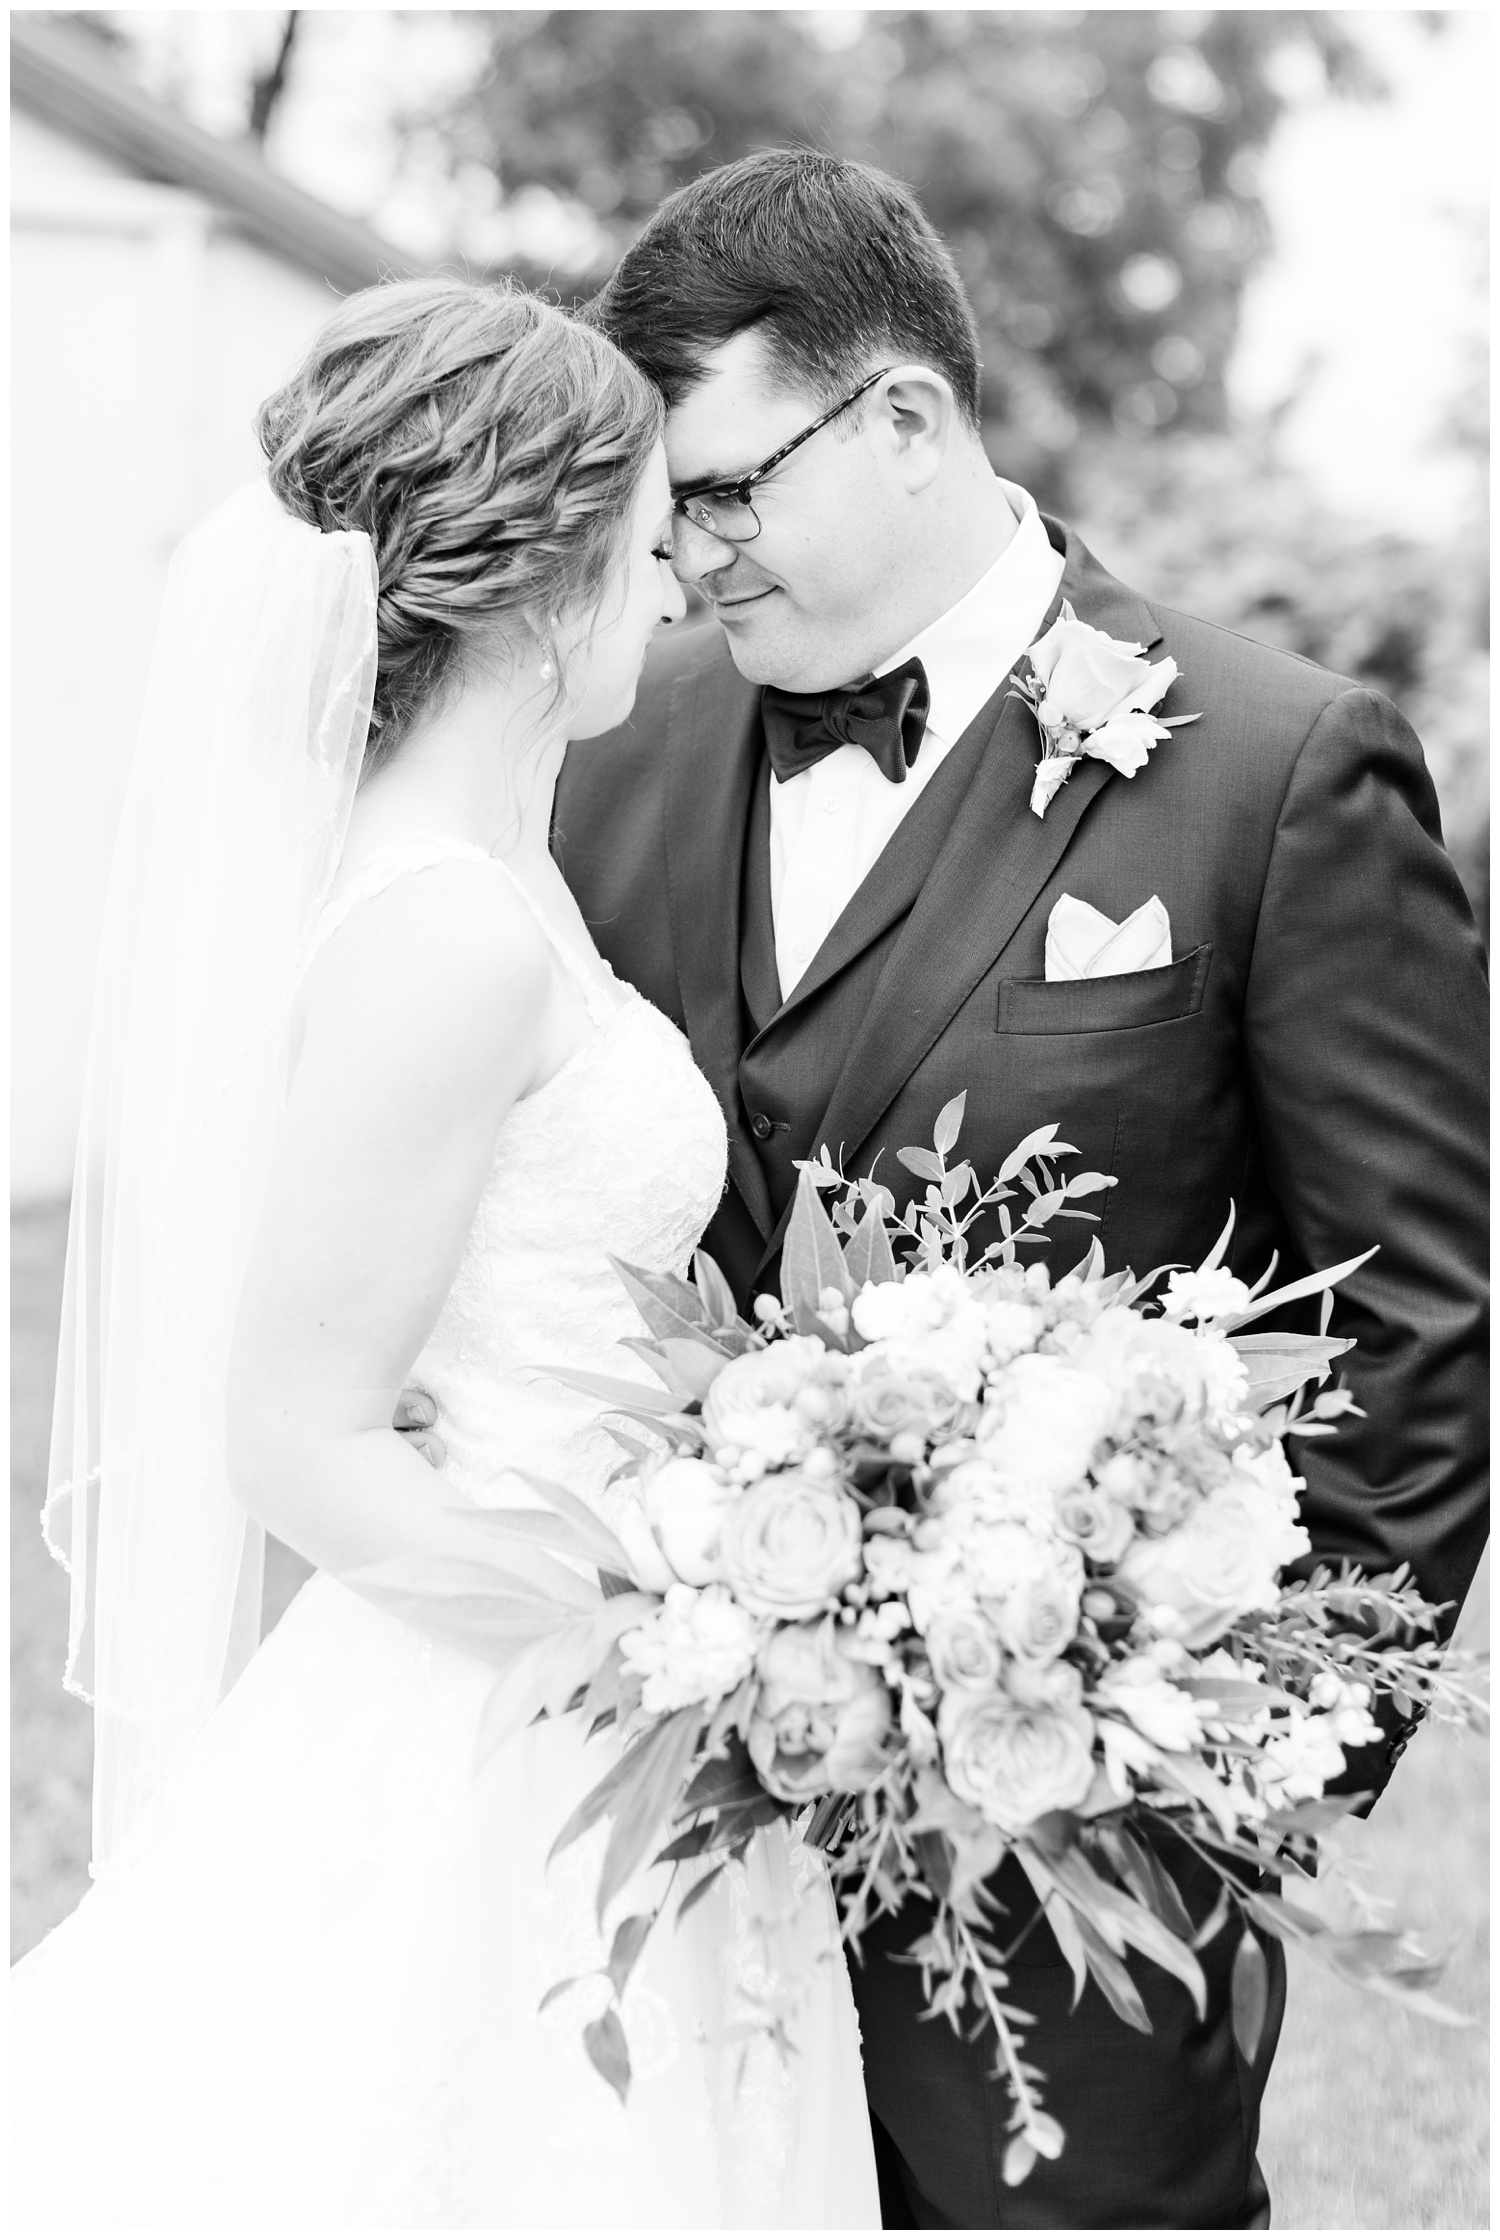 Joe and Leslie share a quiet moment before their wedding ceremony | CB Studio